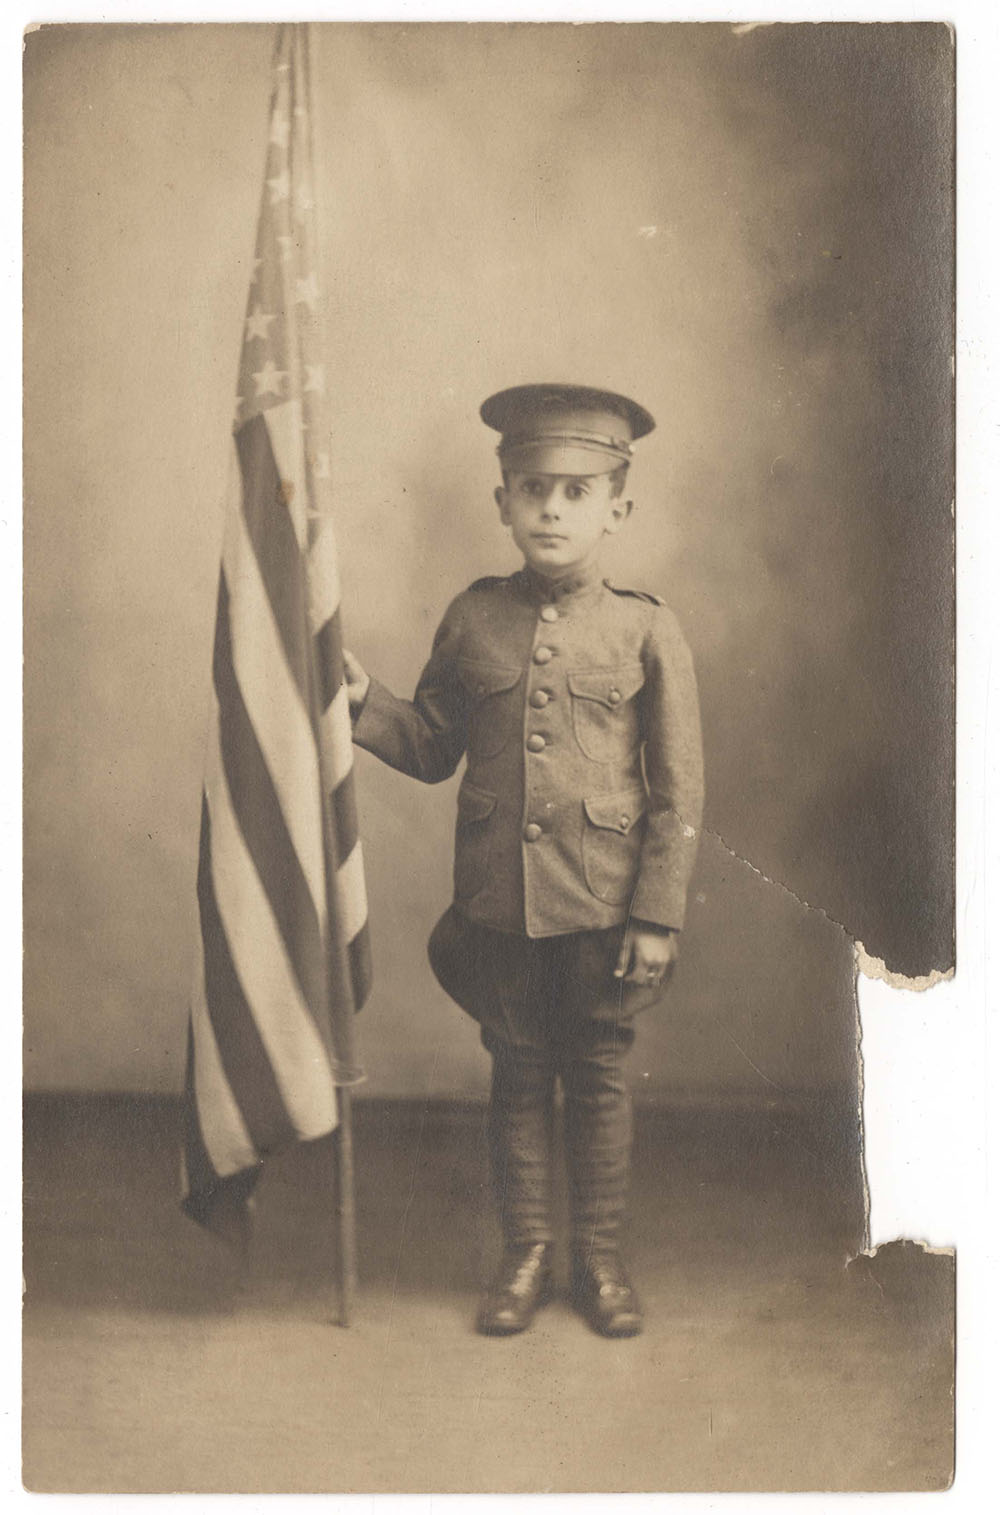 Sepia photograph of a small white boy dressed in a play military uniform and cap, holding a United States flag that is taller than he is.